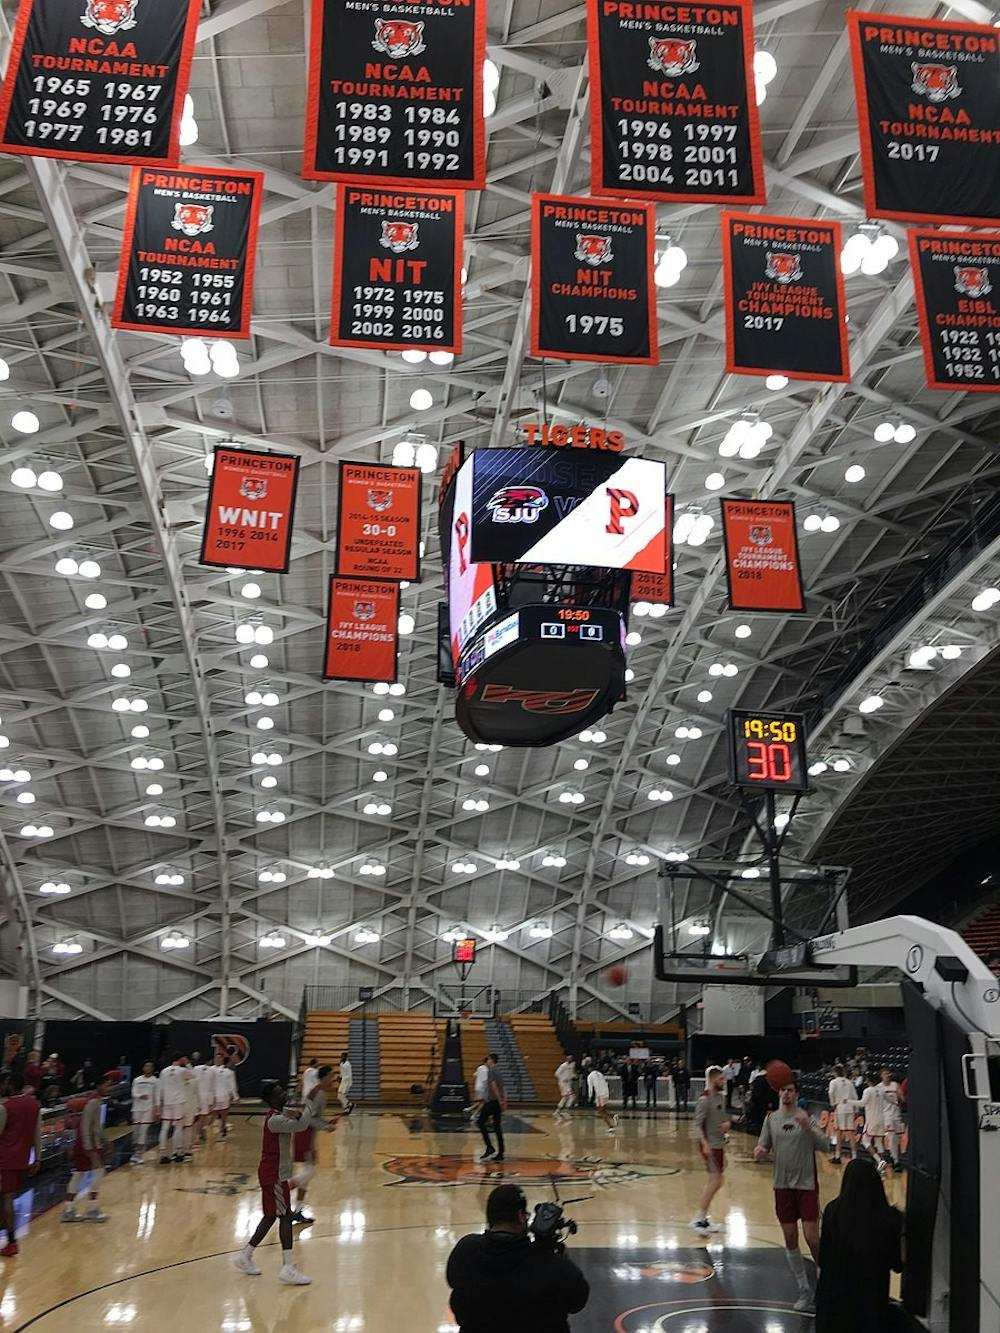 <p>The rafters above Princeton’s Jadwin Gym.</p>
<h6>Photo Credit: Jonathan Schilling / Wikimedia Commons</h6>